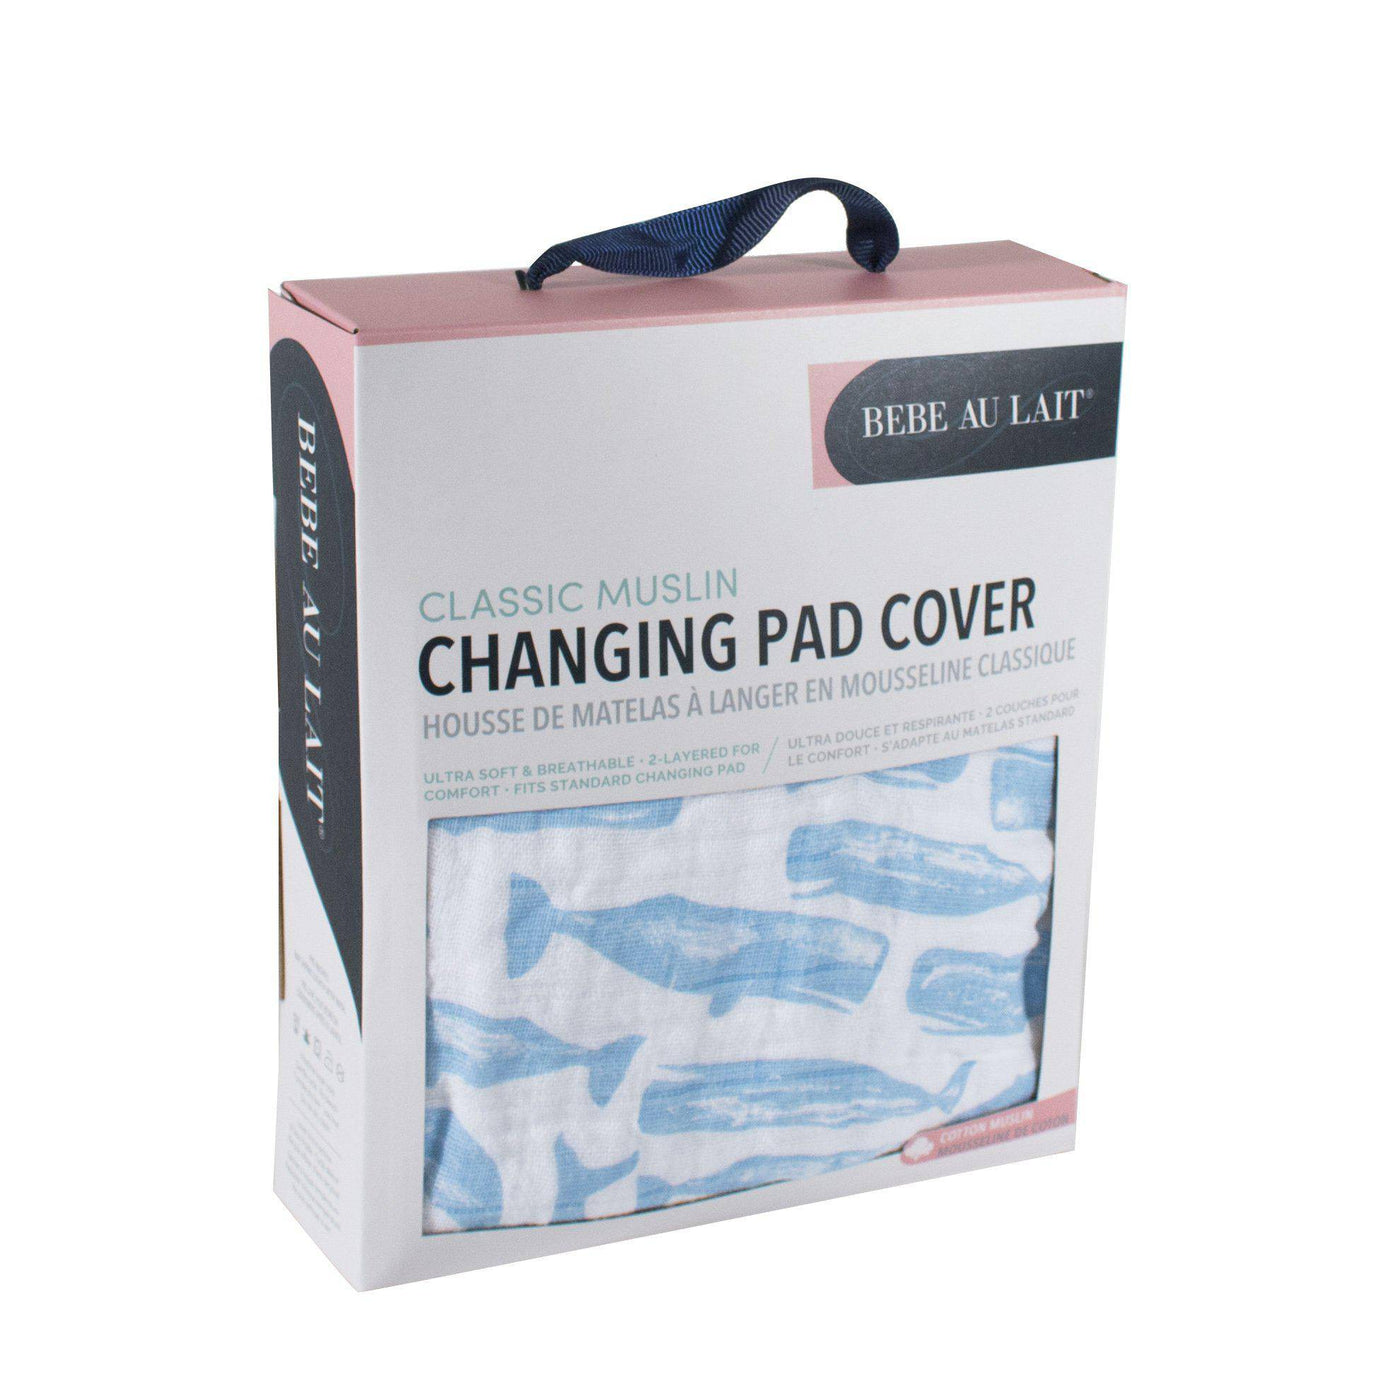 Moby Muslin Changing Pad Cover - Changing Pad Cover - Bebe au Lait